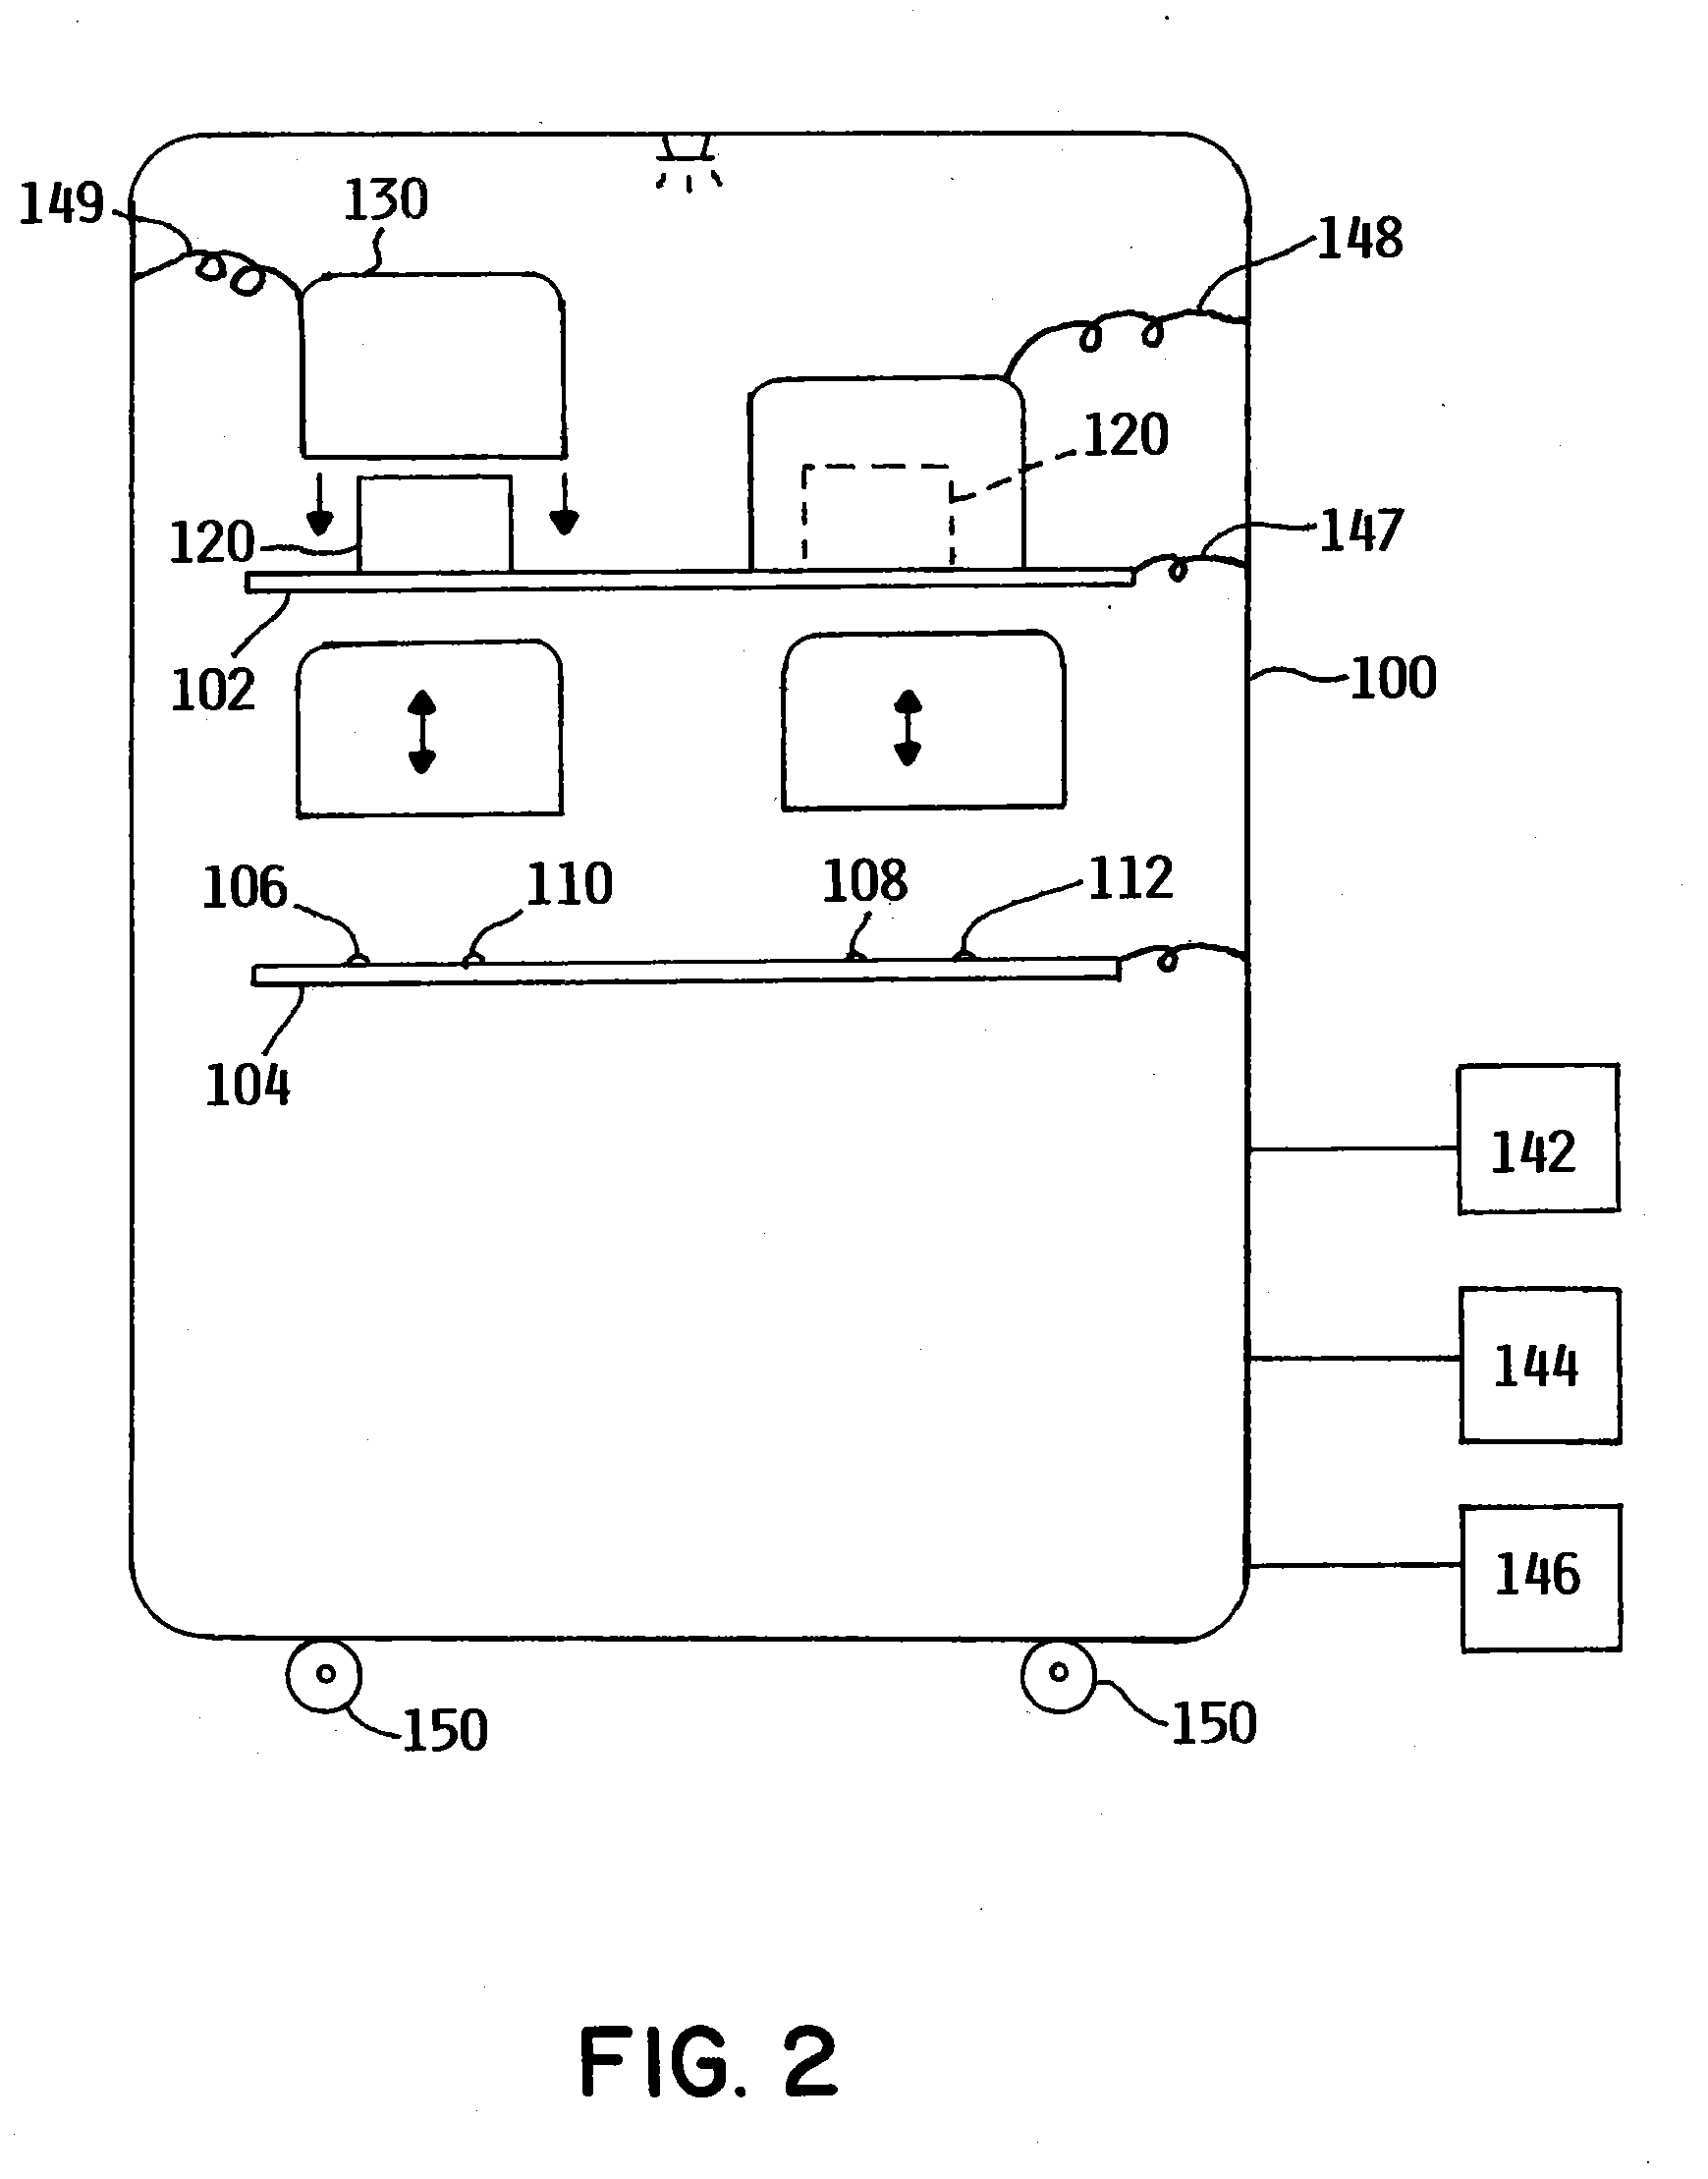 Methods and apparatuses for controlling contamination of substrates